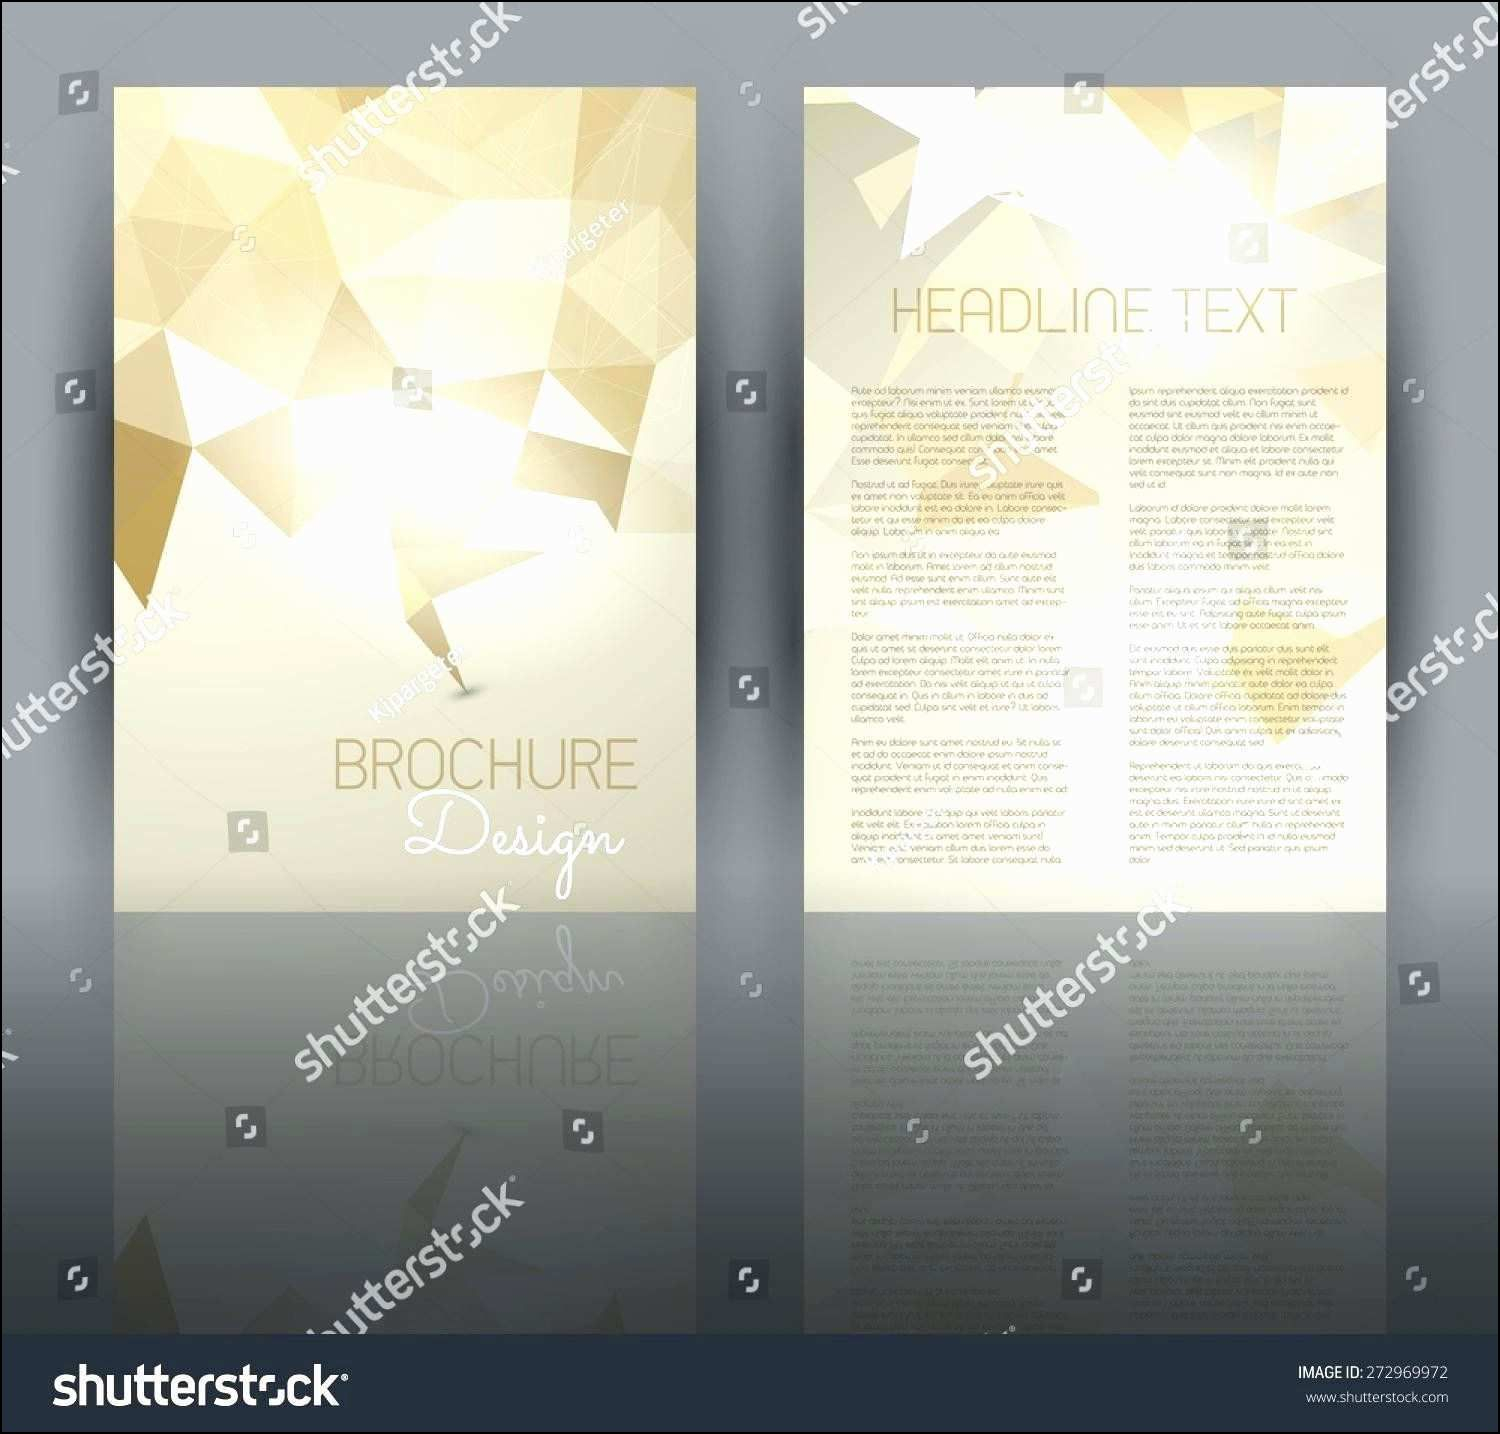 Fresh 25 Double Sided Tri Fold Brochure Template | Brochure Pertaining To Double Sided Tri Fold Brochure Template